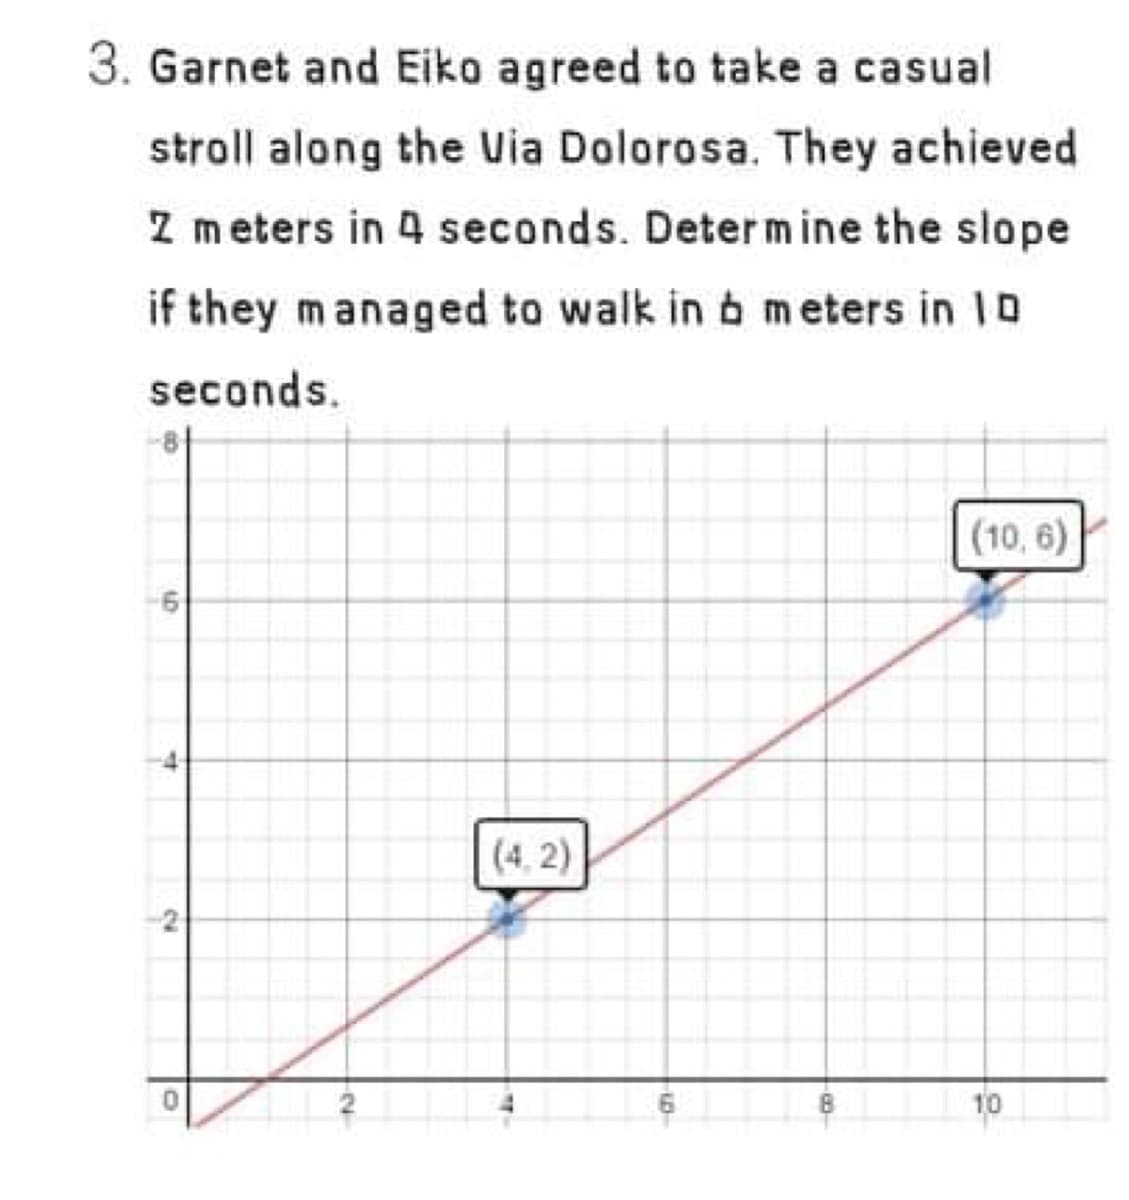 3. Garnet and Eiko agreed to take a casual
stroll along the Uia Dolorosa. They achieved
Z meters in 4 seconds. Determine the slope
if they managed to walk in b meters in 1D
seconds.
|(10, 6)
(4, 2)
10
2.
